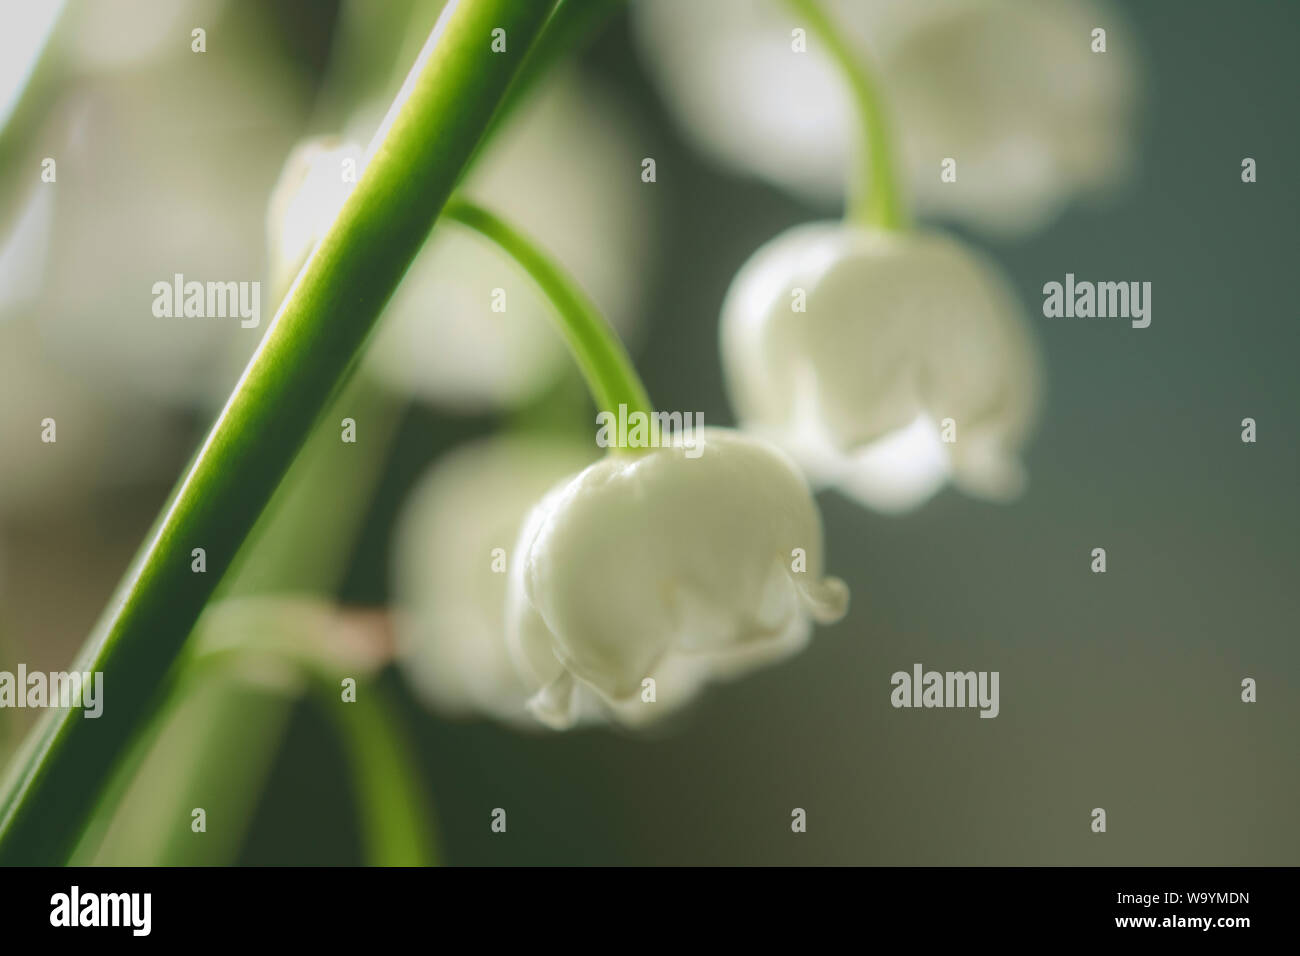 Lily of the valley flowers Stock Photo